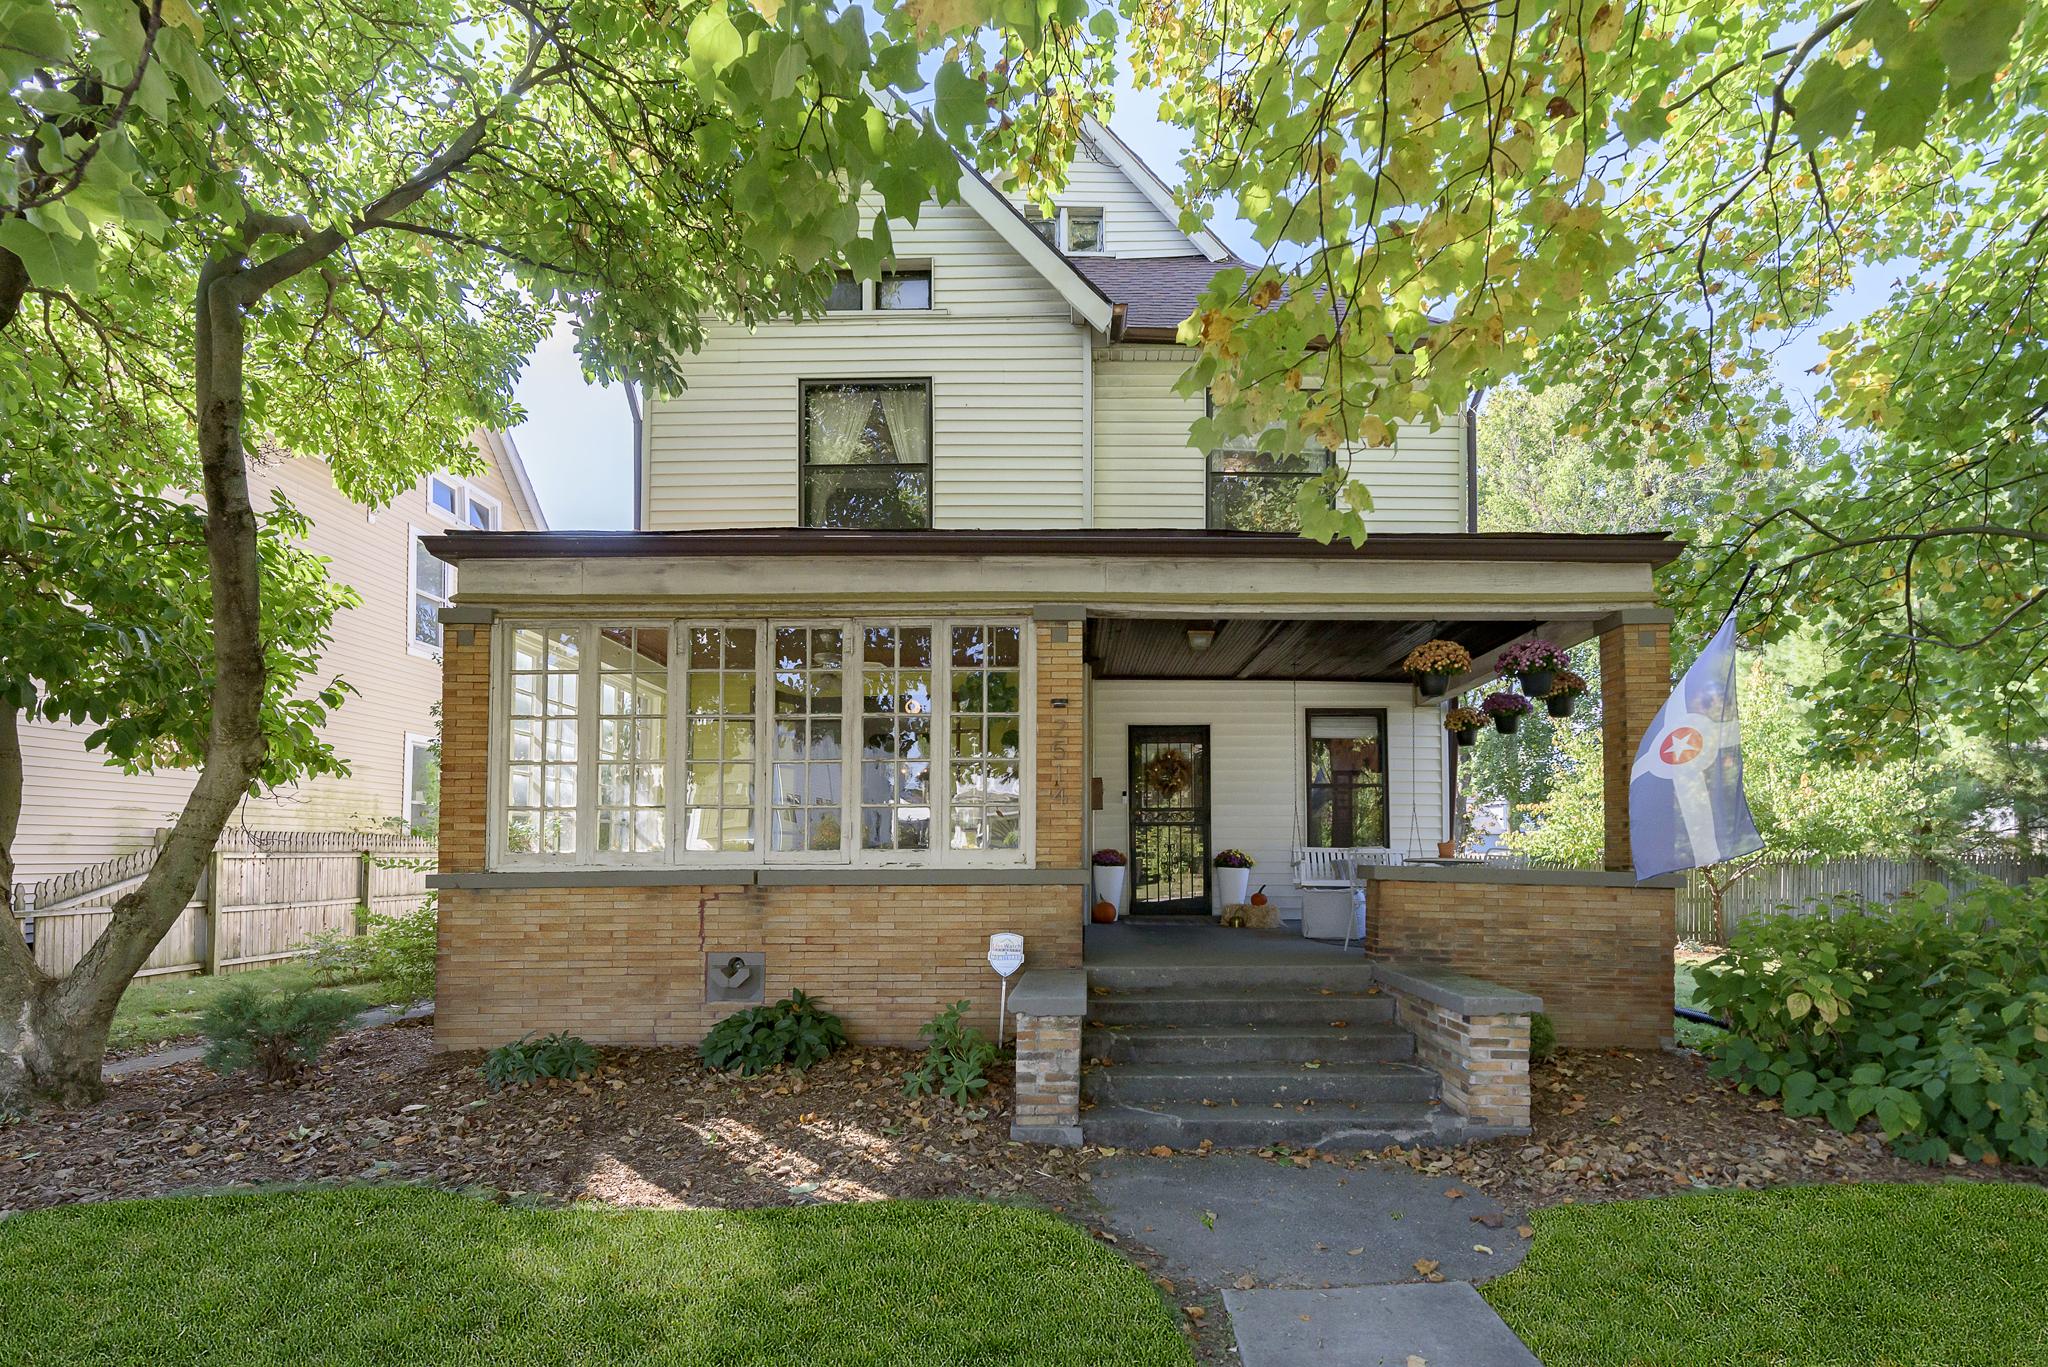 Photo one of 2514 N Carrollton Ave Indianapolis IN 46205 | MLS 21948260